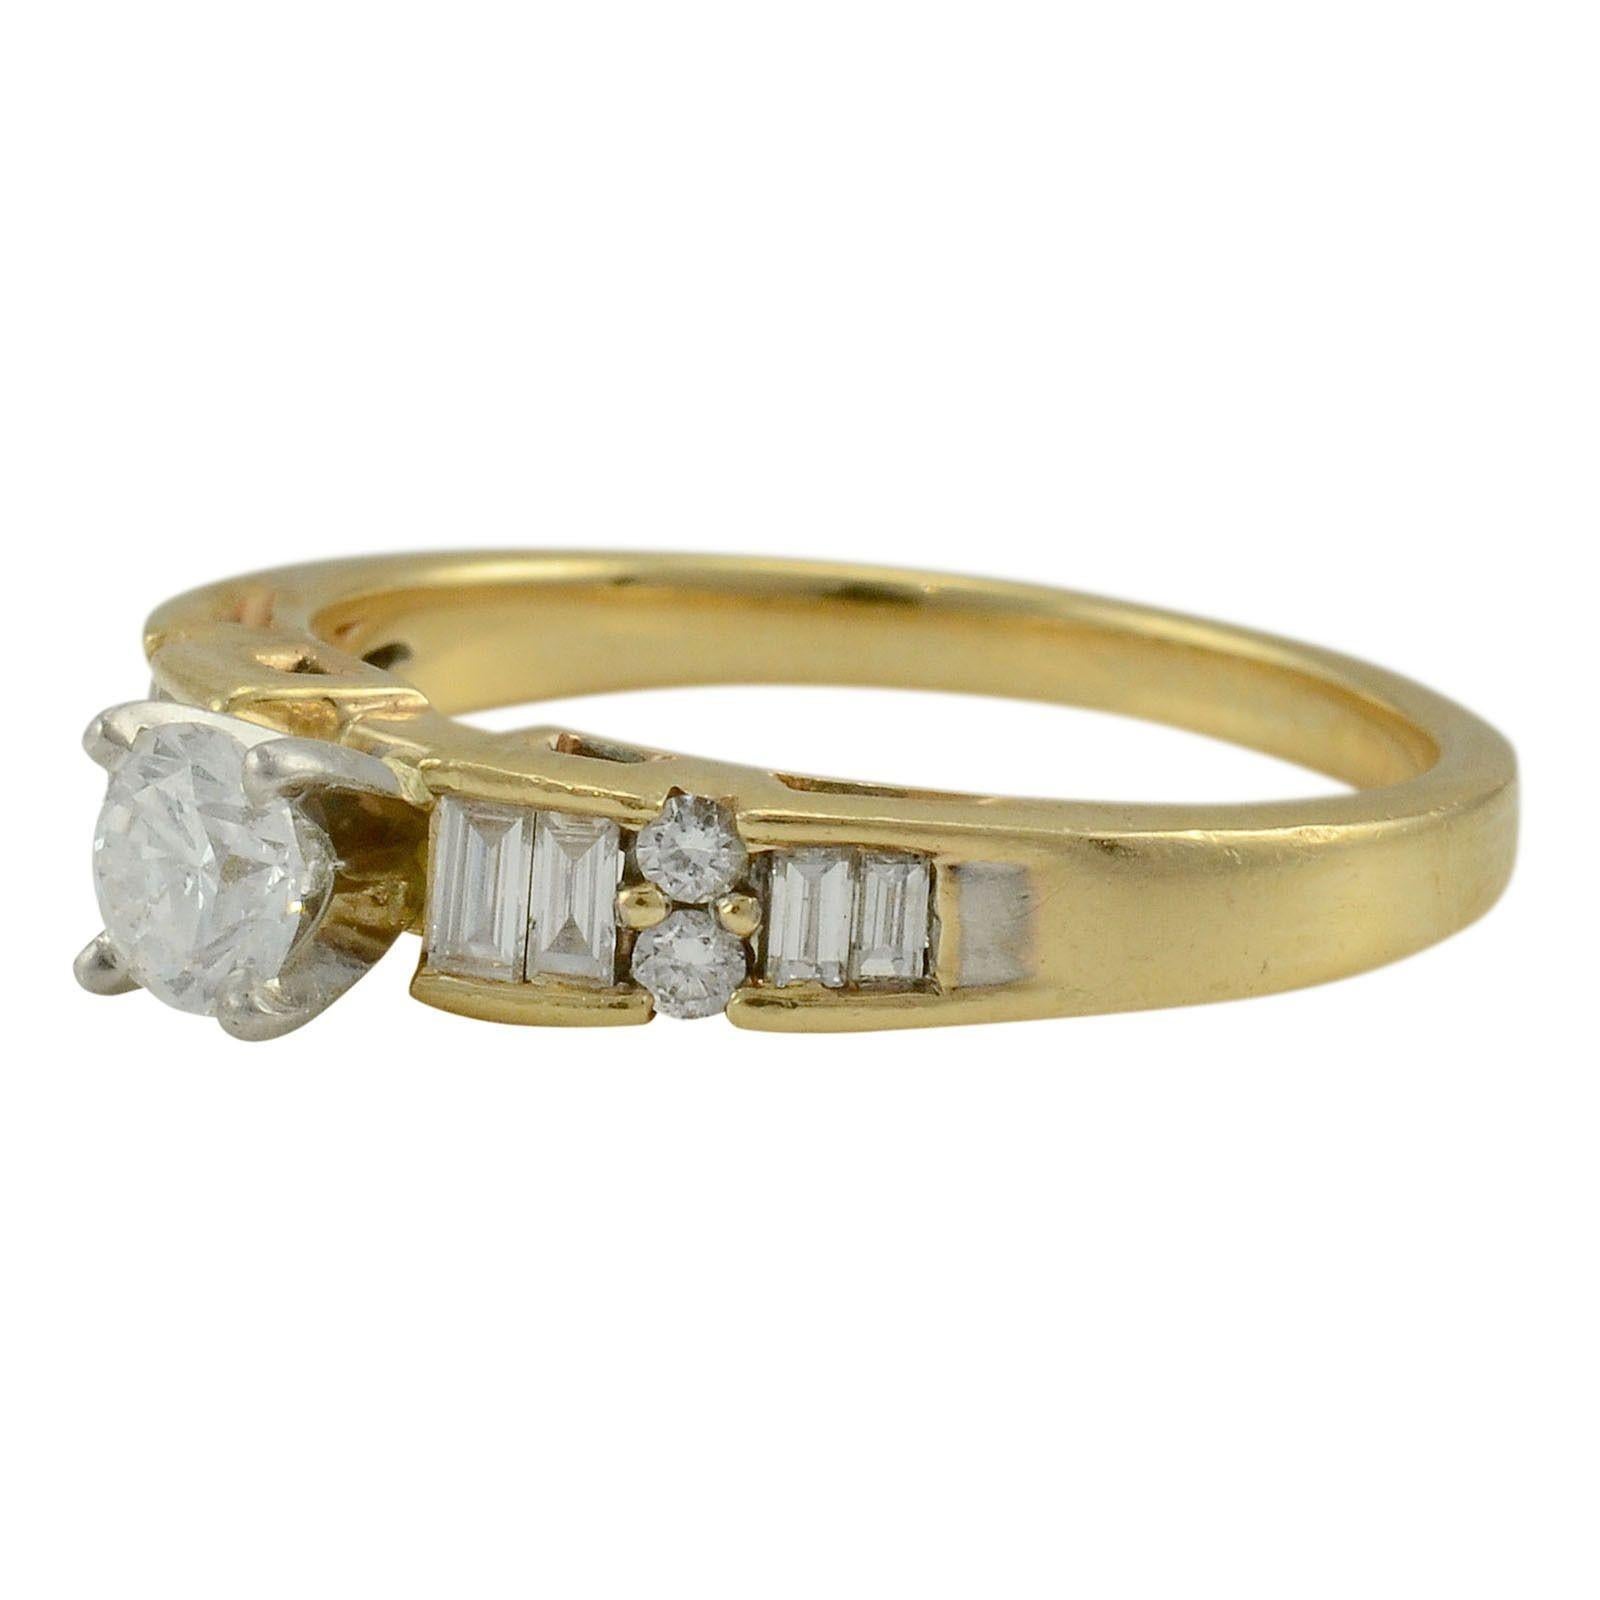 Estate 0.30 carat center diamond two tone gold engagement ring. This 14 karat white gold and yellow gold ring has a center round diamond that is 0.30 carats, SI1 clarity, G color, eight baguette diamonds and four full cut diamonds at 0.43 carat